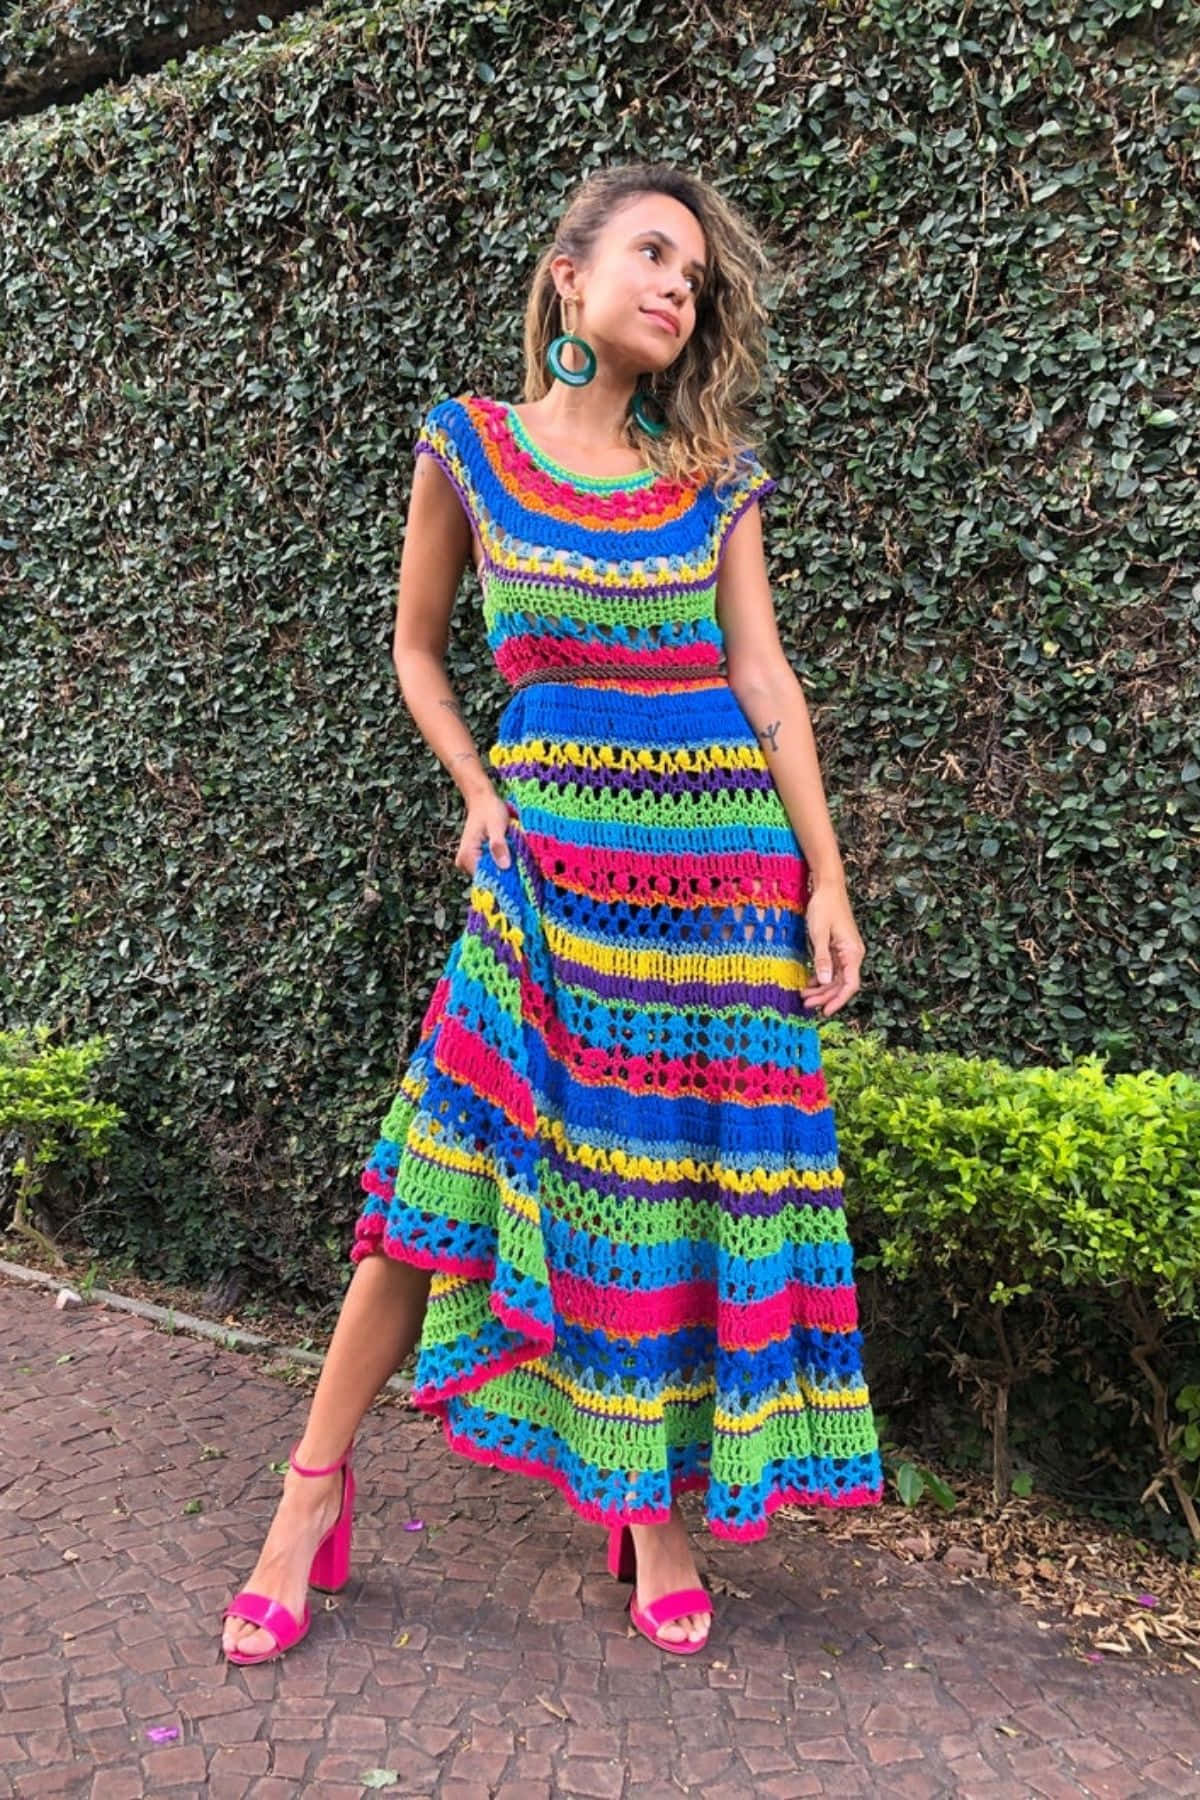 A Woman In A Colorful Crochet Dress Poses In Front Of A Wall